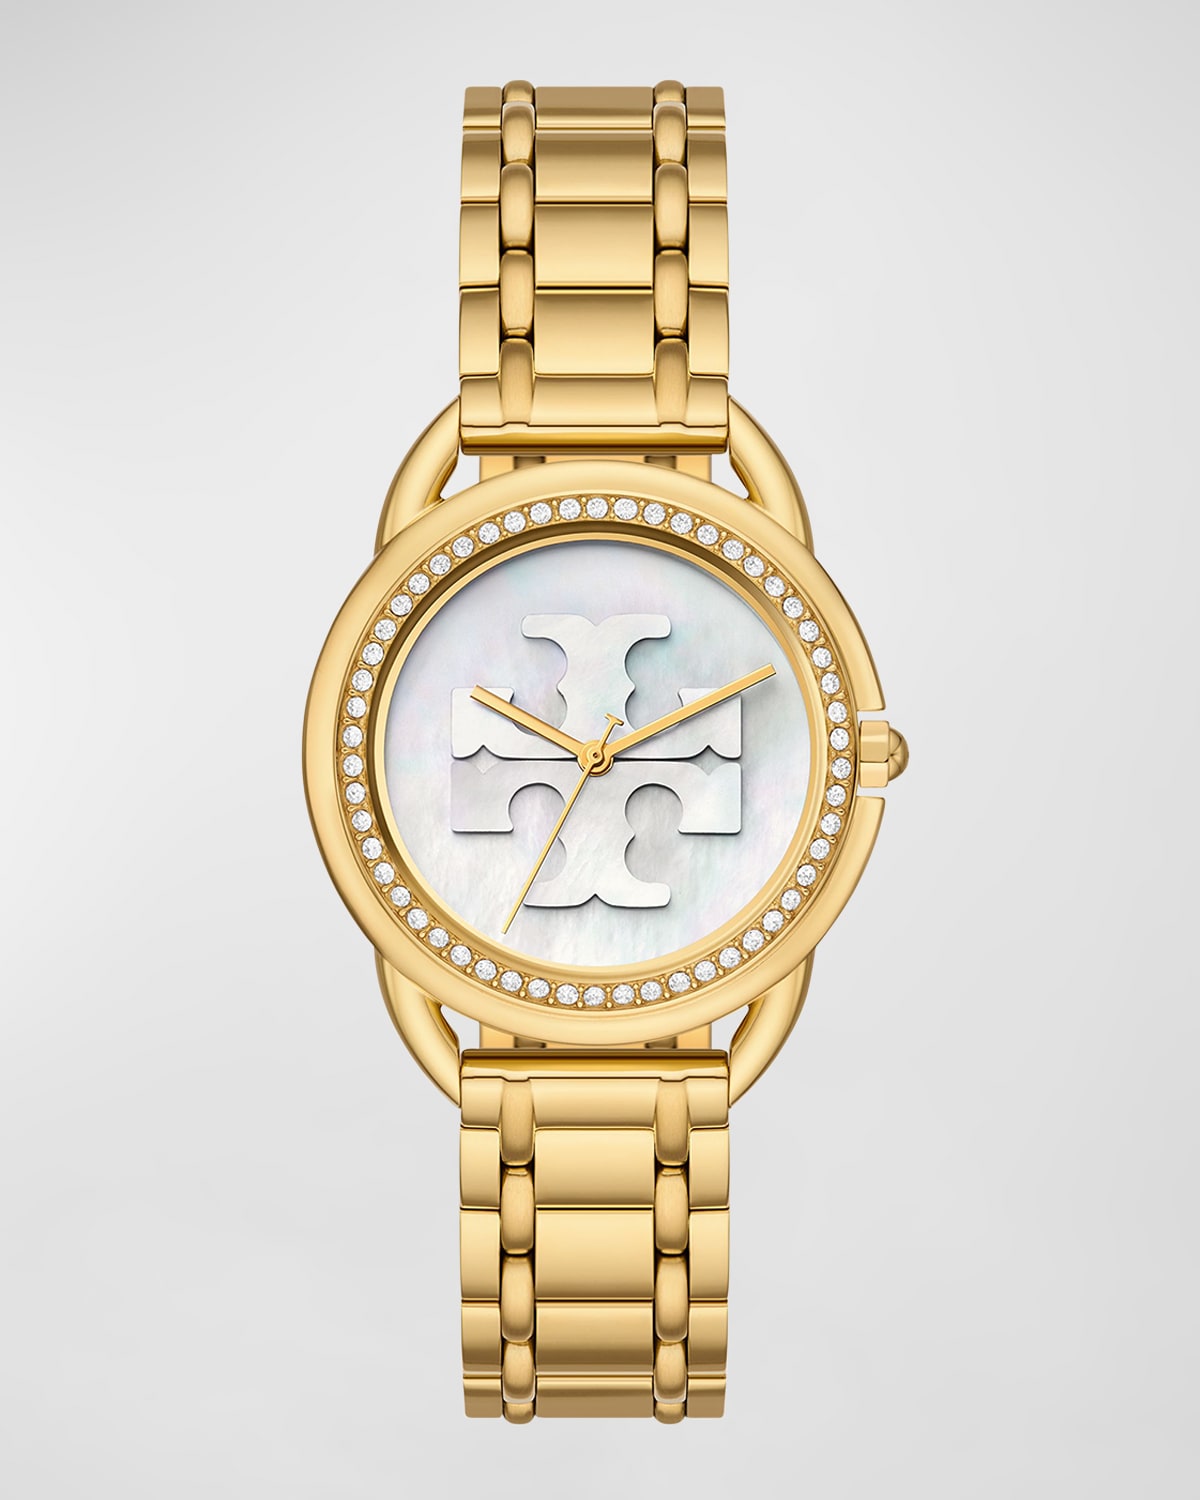 The Miller Gold-Tone Mother-of-Pearl Watch